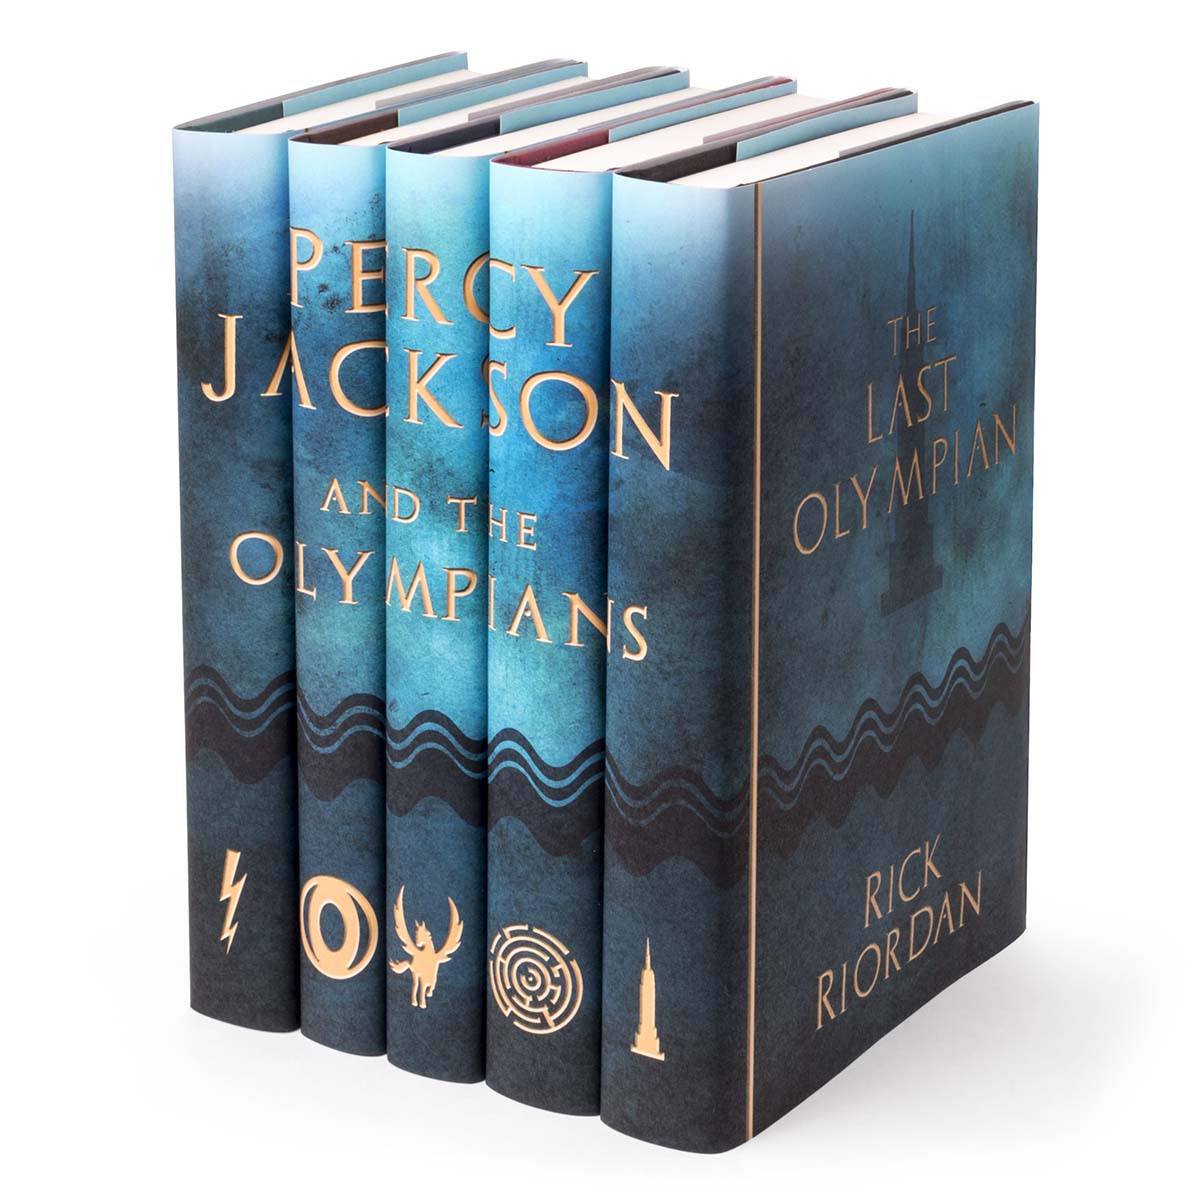 Image of Percy Jackson and the Olympians Set